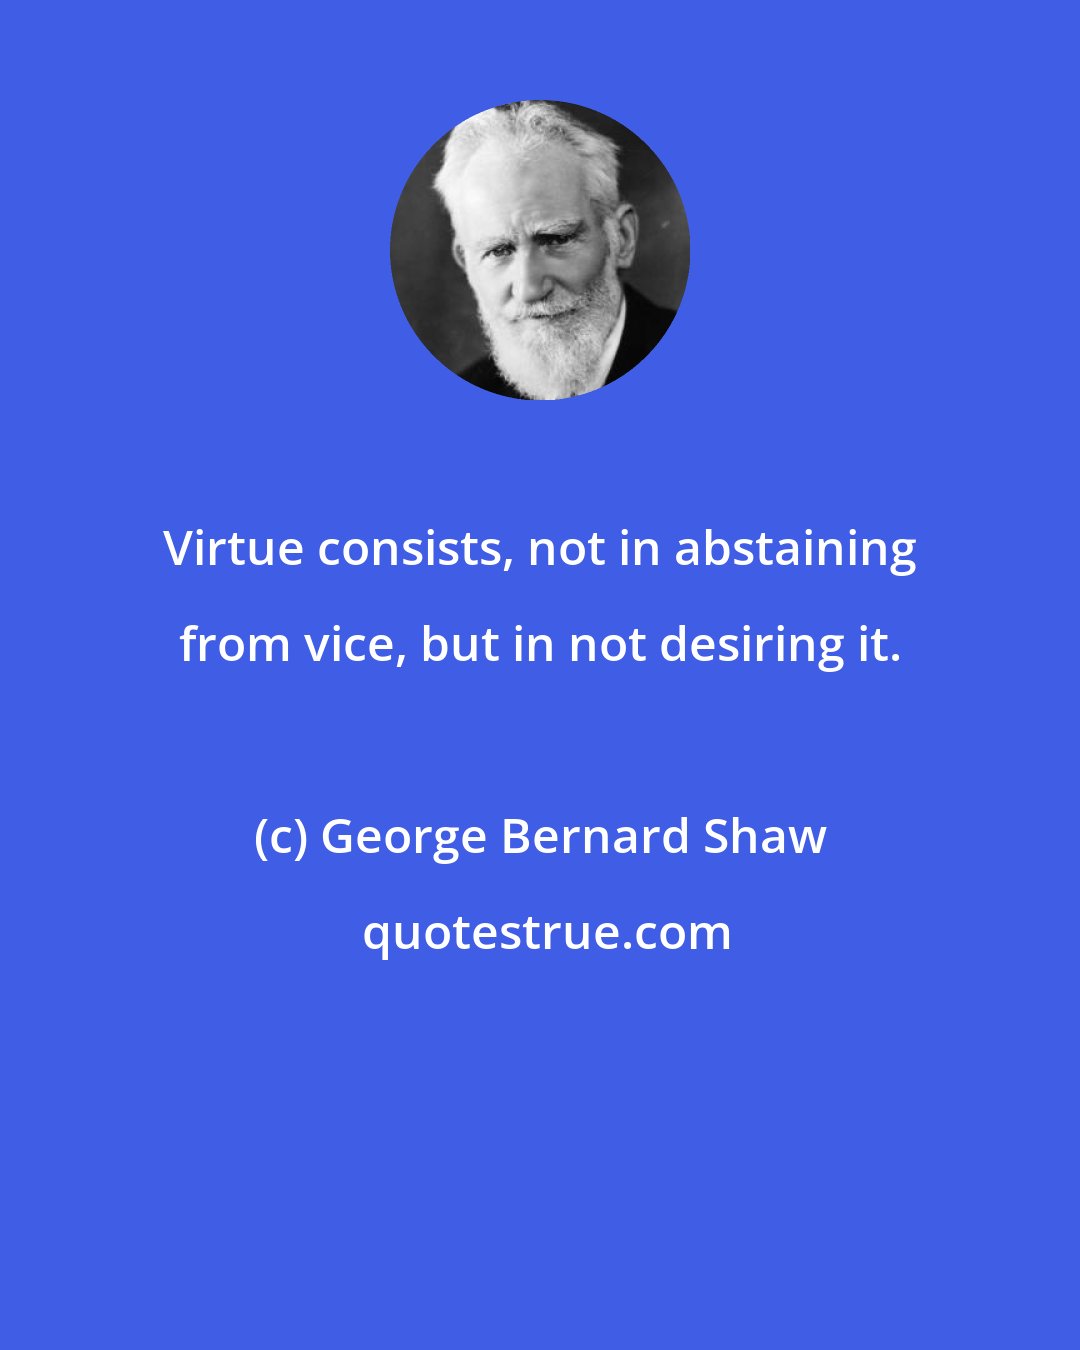 George Bernard Shaw: Virtue consists, not in abstaining from vice, but in not desiring it.